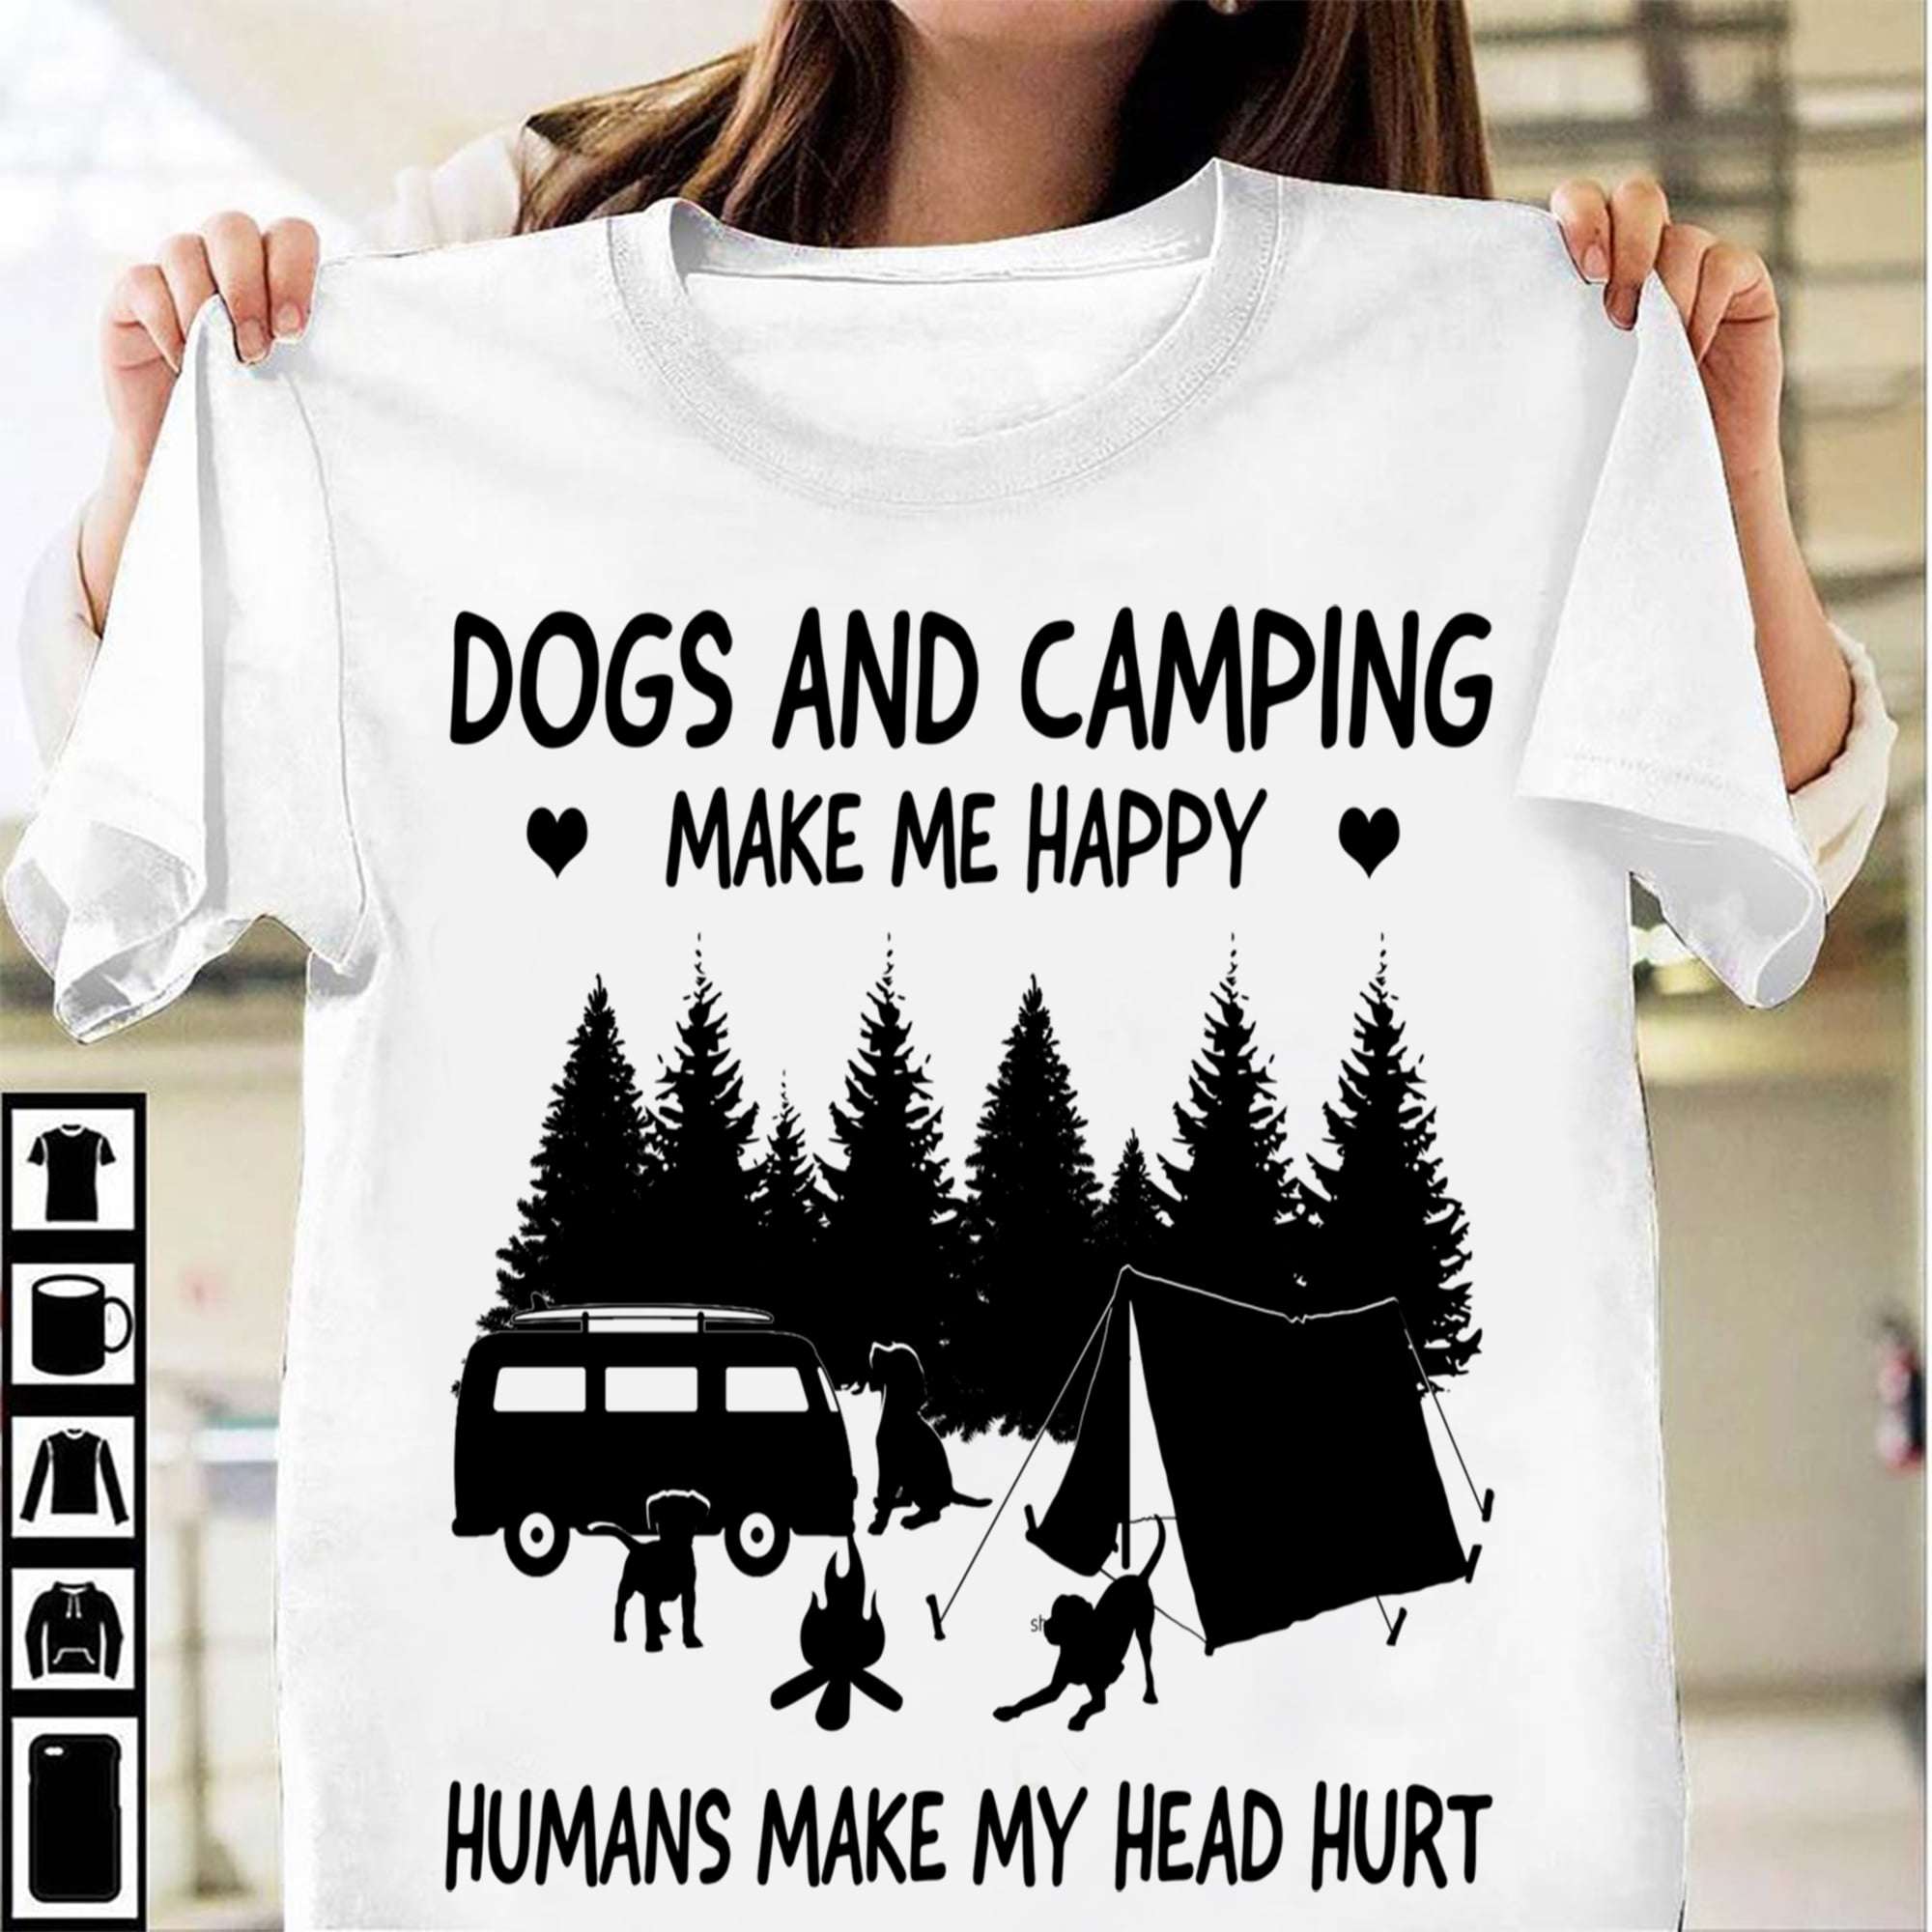 Camping With Dog - Dogs and camping make me happy humans make my head hurt